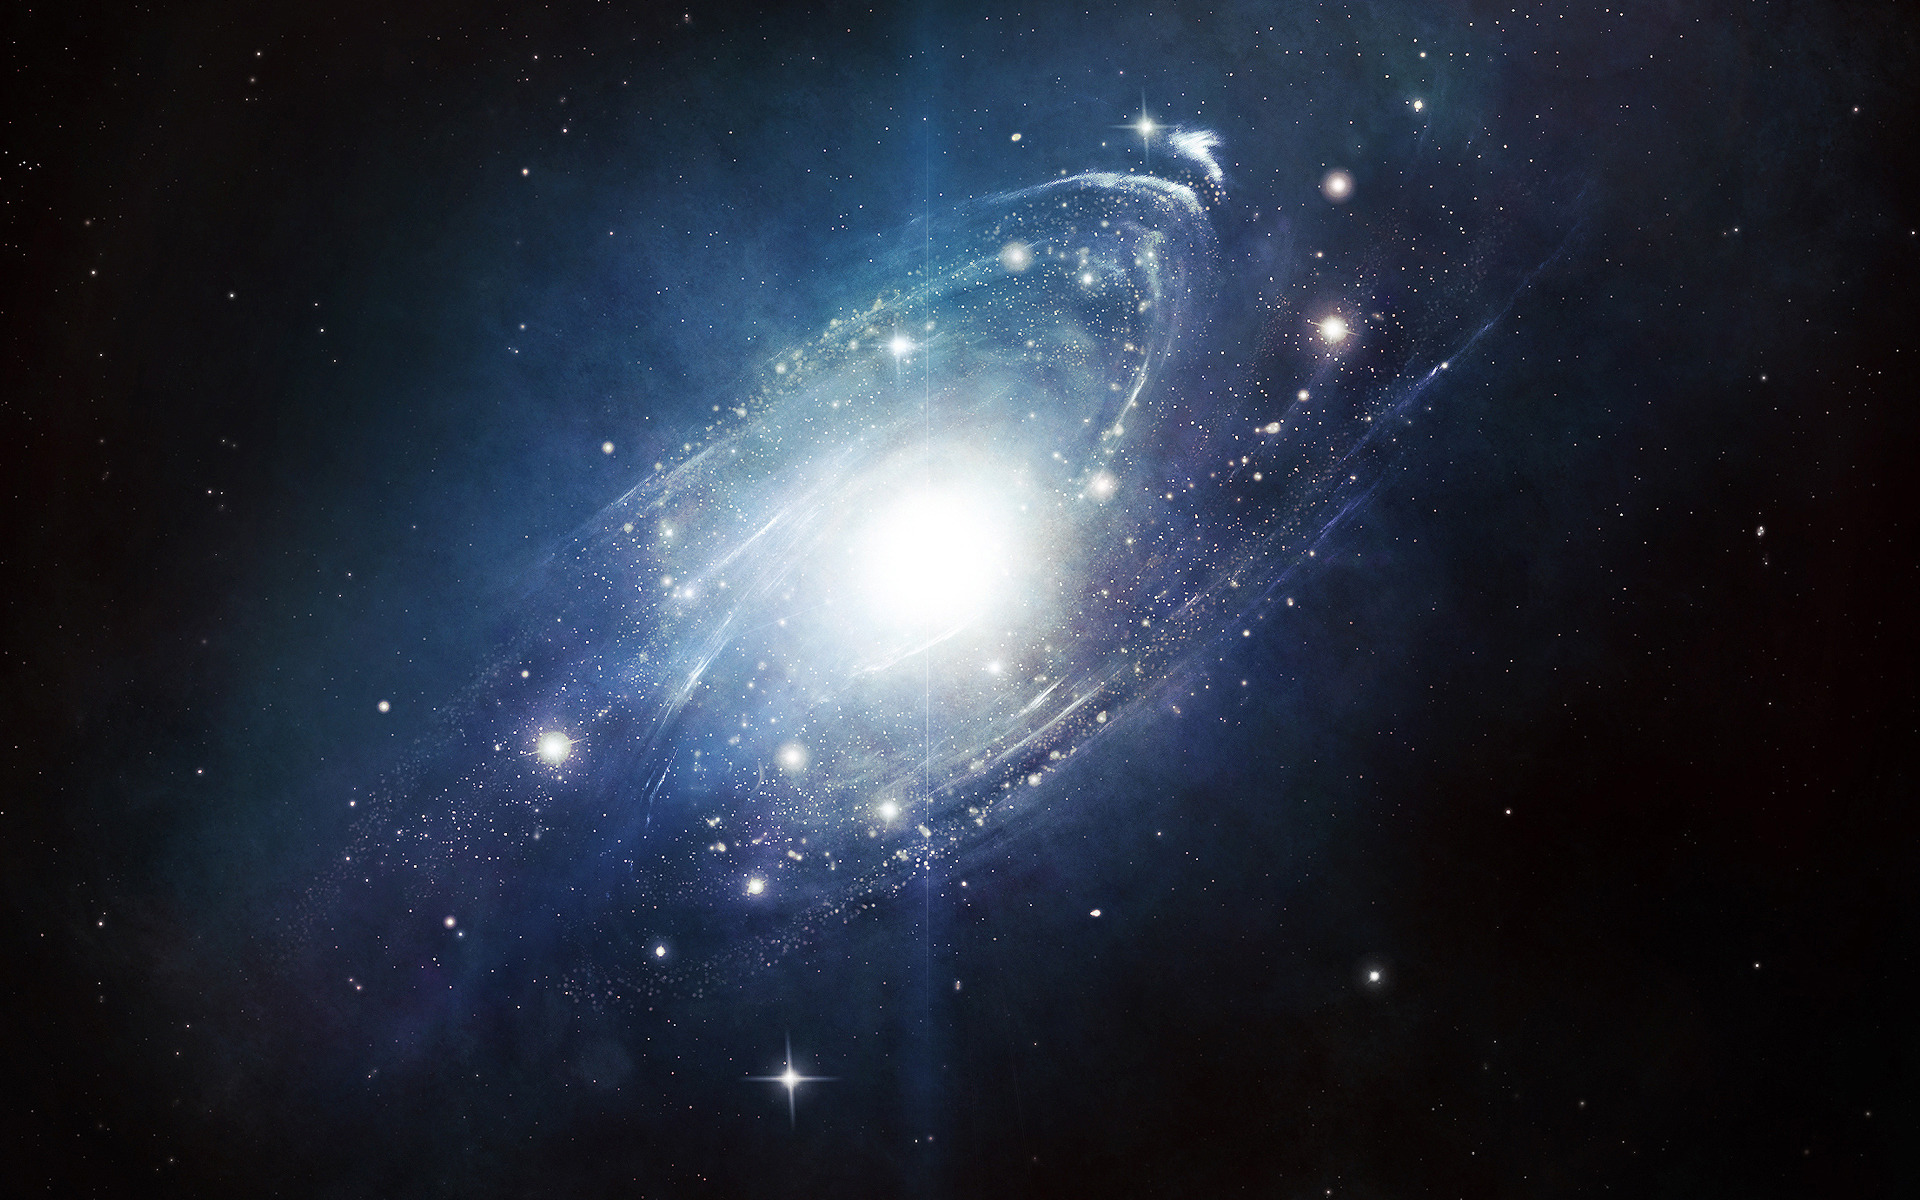  Galaxy  Full HD  Wallpaper and Background Image 1920x1200 